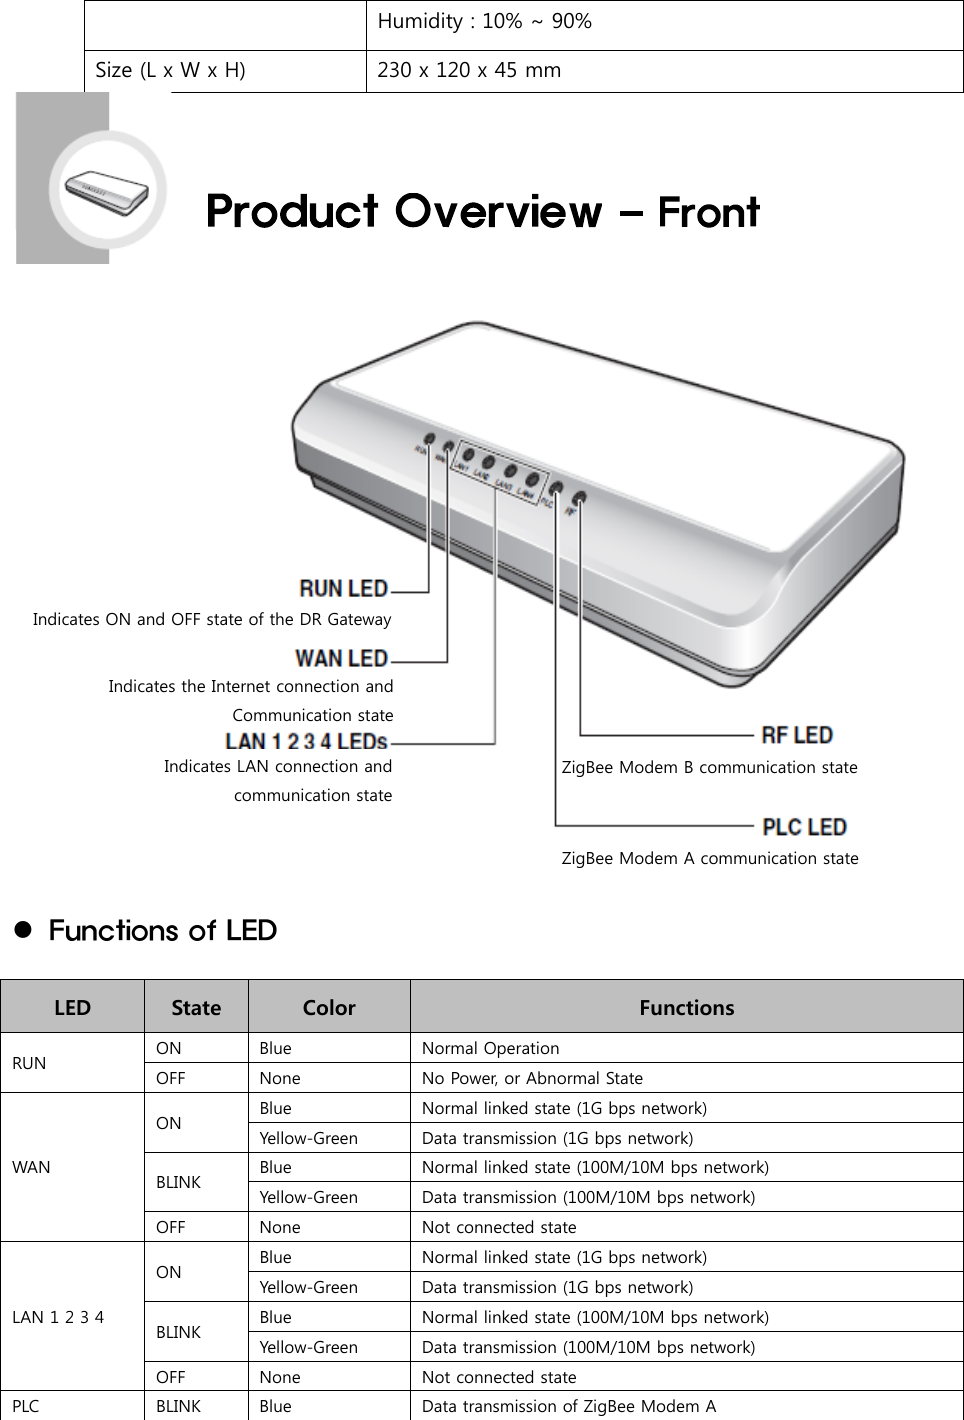 Humidity : 10% ~ 90%Size (L x W x H) 230 x 120 x 45 mmFunctions of LEDLED State Color FunctionsRUN ON Blue Normal OperationOFF None No Power, or Abnormal StateWANON Blue Normal linked state (1G bps network)Yellow-Green Data transmission (1G bps network)BLINK Blue Normal linked state (100M/10M bps network)Yellow-Green Data transmission (100M/10M bps network)OFF None Not connected stateLAN 1 2 3 4ON Blue Normal linked state (1G bps network)Yellow-Green Data transmission (1G bps network)BLINK Blue Normal linked state (100M/10M bps network)Yellow-Green Data transmission (100M/10M bps network)OFF None Not connected statePLC BLINK Blue Data transmission of ZigBee Modem AIndicates ON and OFF state of the DR GatewayIndicates the Internet connection andCommunicationstateZigBee Modem B communication stateIndicates LAN connection andcommunication stateZigBee Modem A communication state